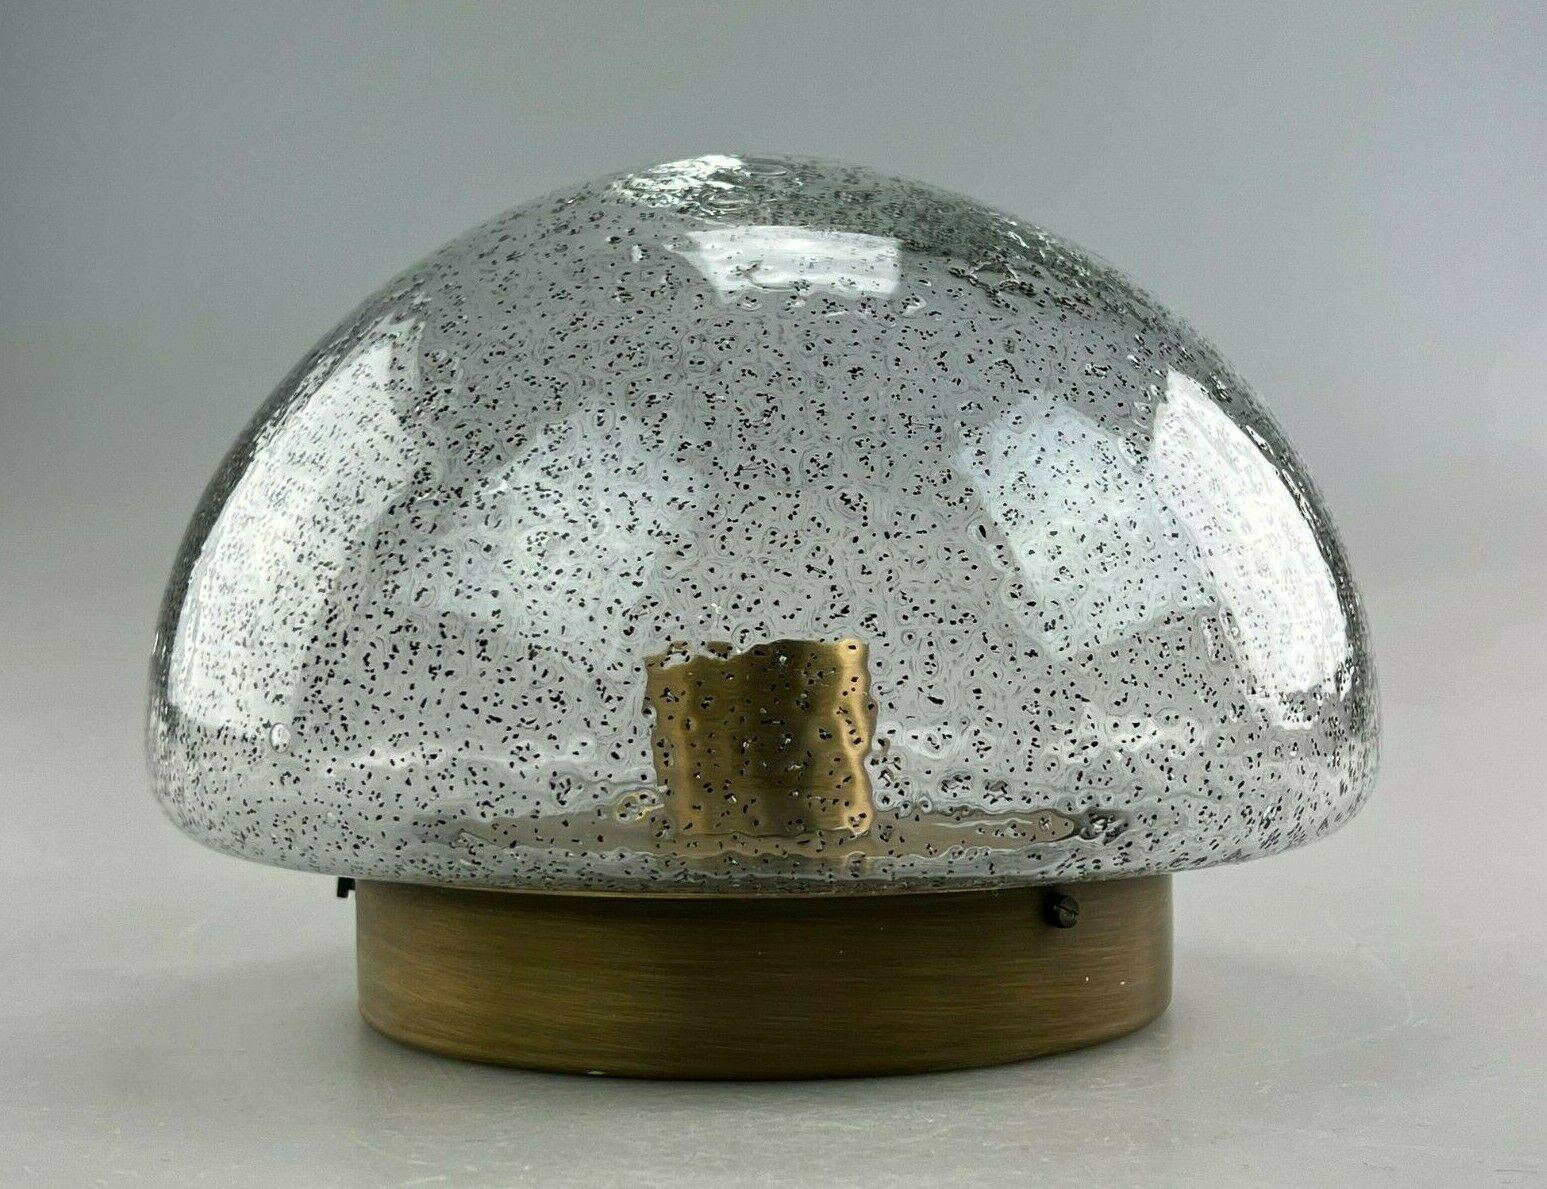 60s 70s lamp light wall lamp wall lamp Hillebrand Space Age Design

Object: wall lamp

Manufacturer: Hillebrand

Condition: good

Age: around 1960-1970

Dimensions:

Diameter = 22.5cm
Height = 15.5cm

Other notes:

The pictures